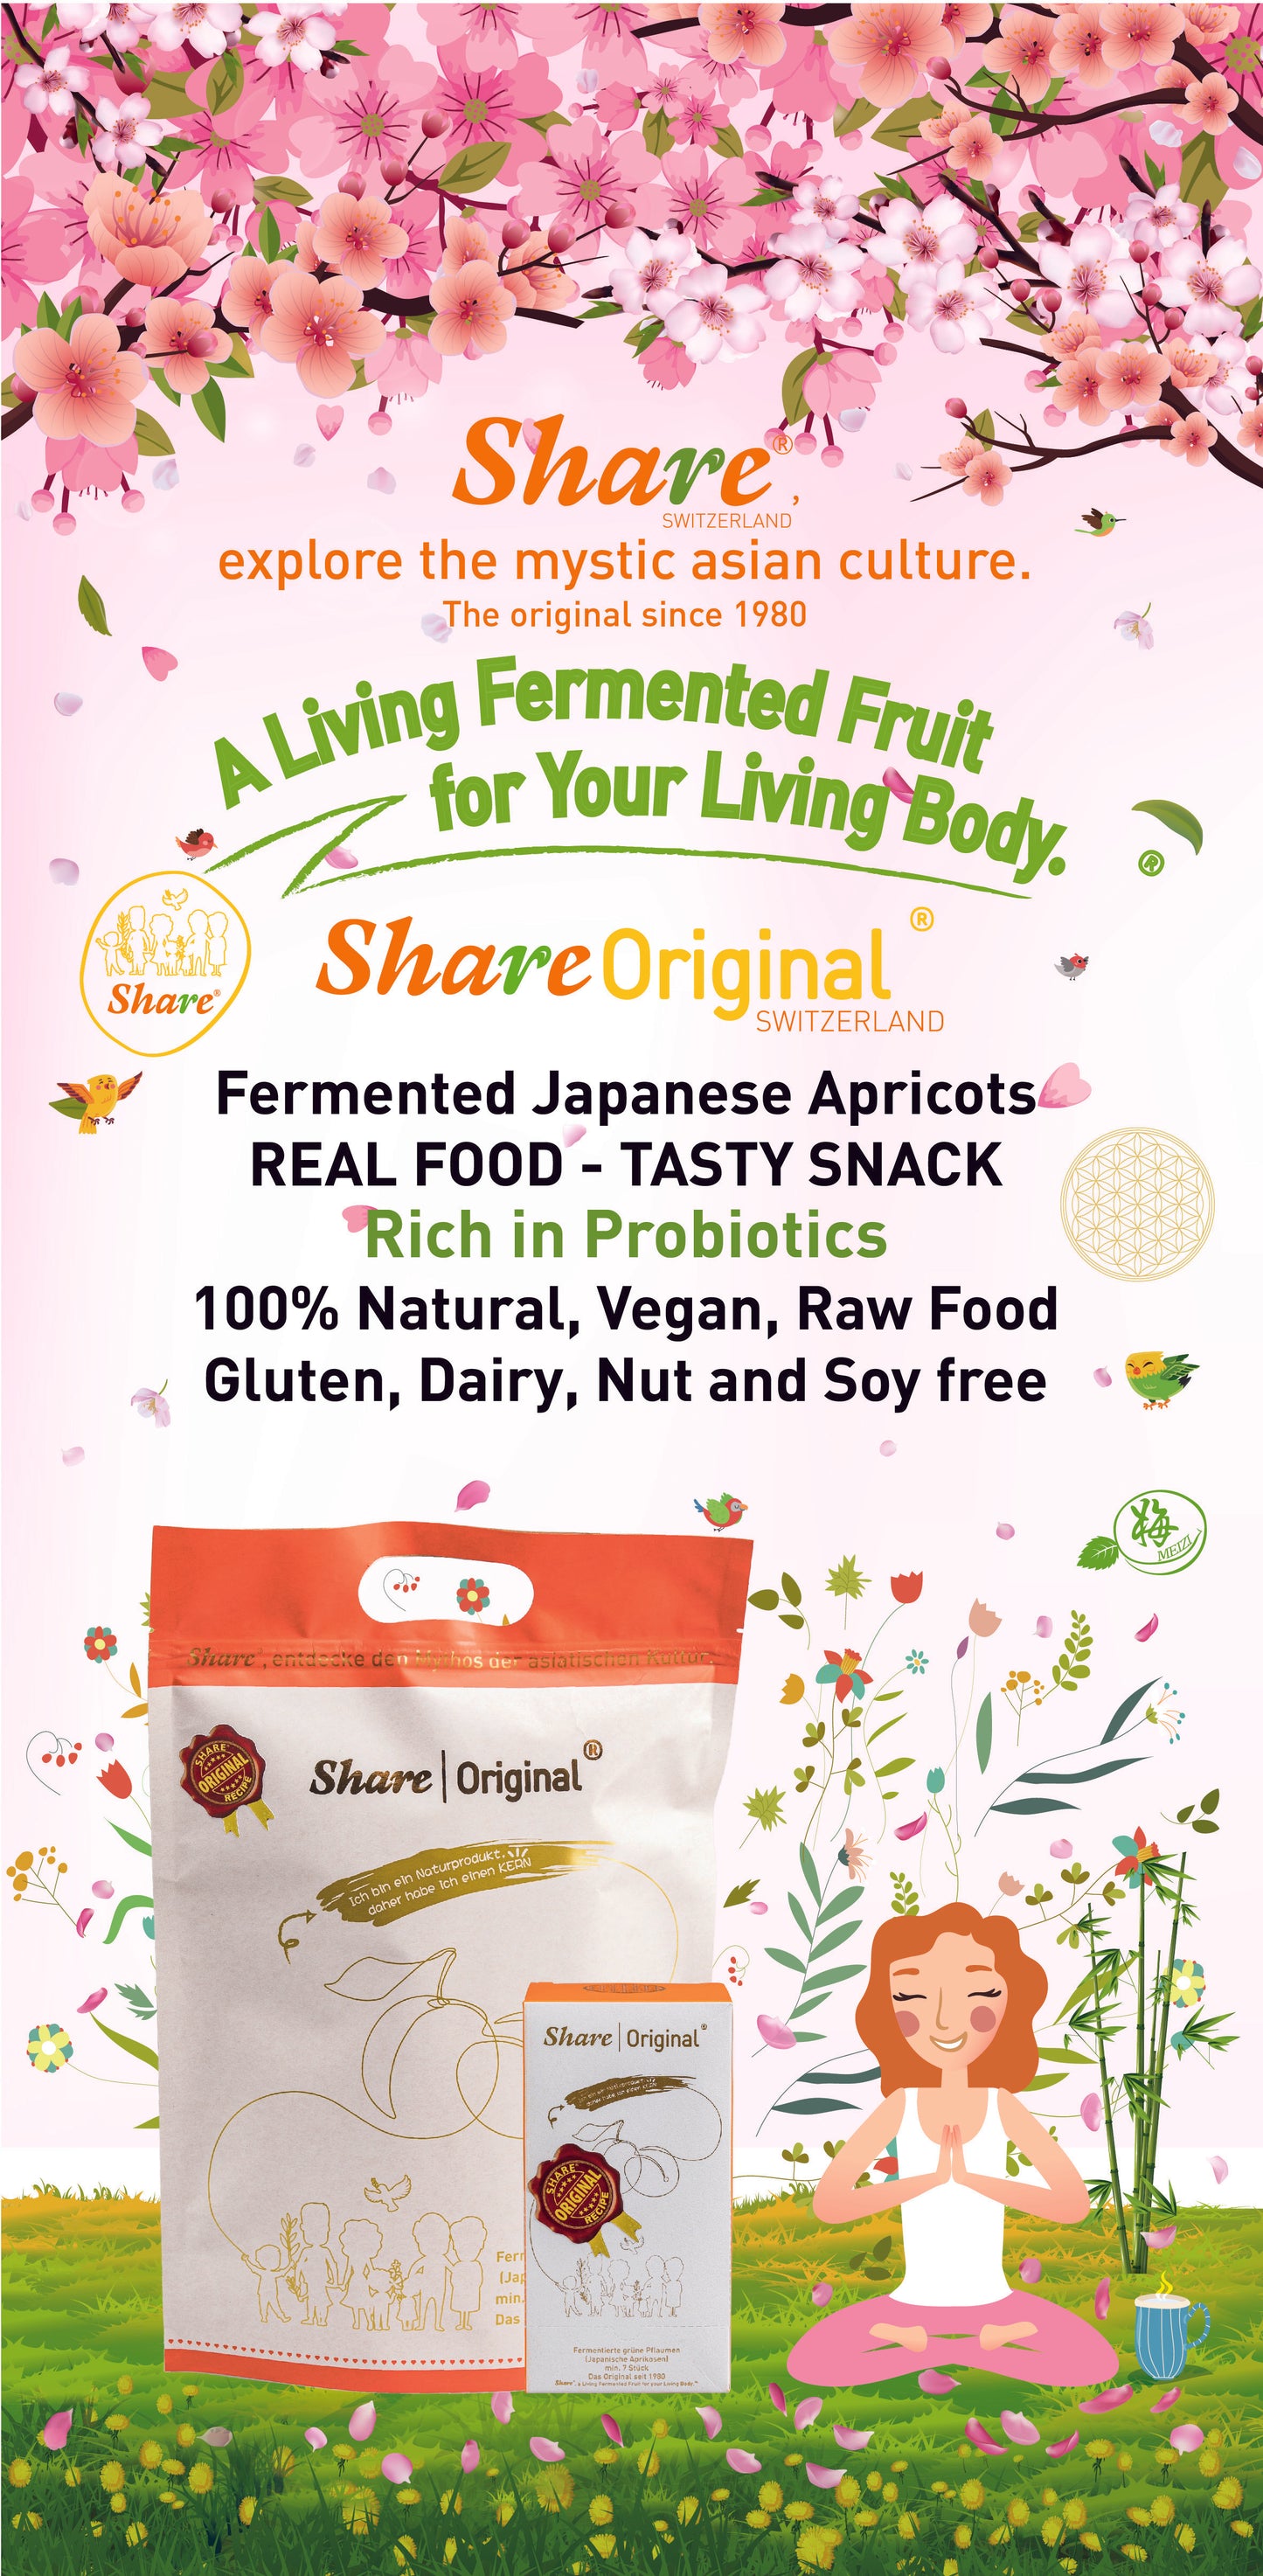 Share Original® Fermented Plum/Japanese Apricot (7pc Starter Box): 30+month naturally fermented, effective natural alternative to lab-made laxatives & probiotics, vegan & non-GMO, individually wrapped packet easy for travel (Swiss-made, free shipping)